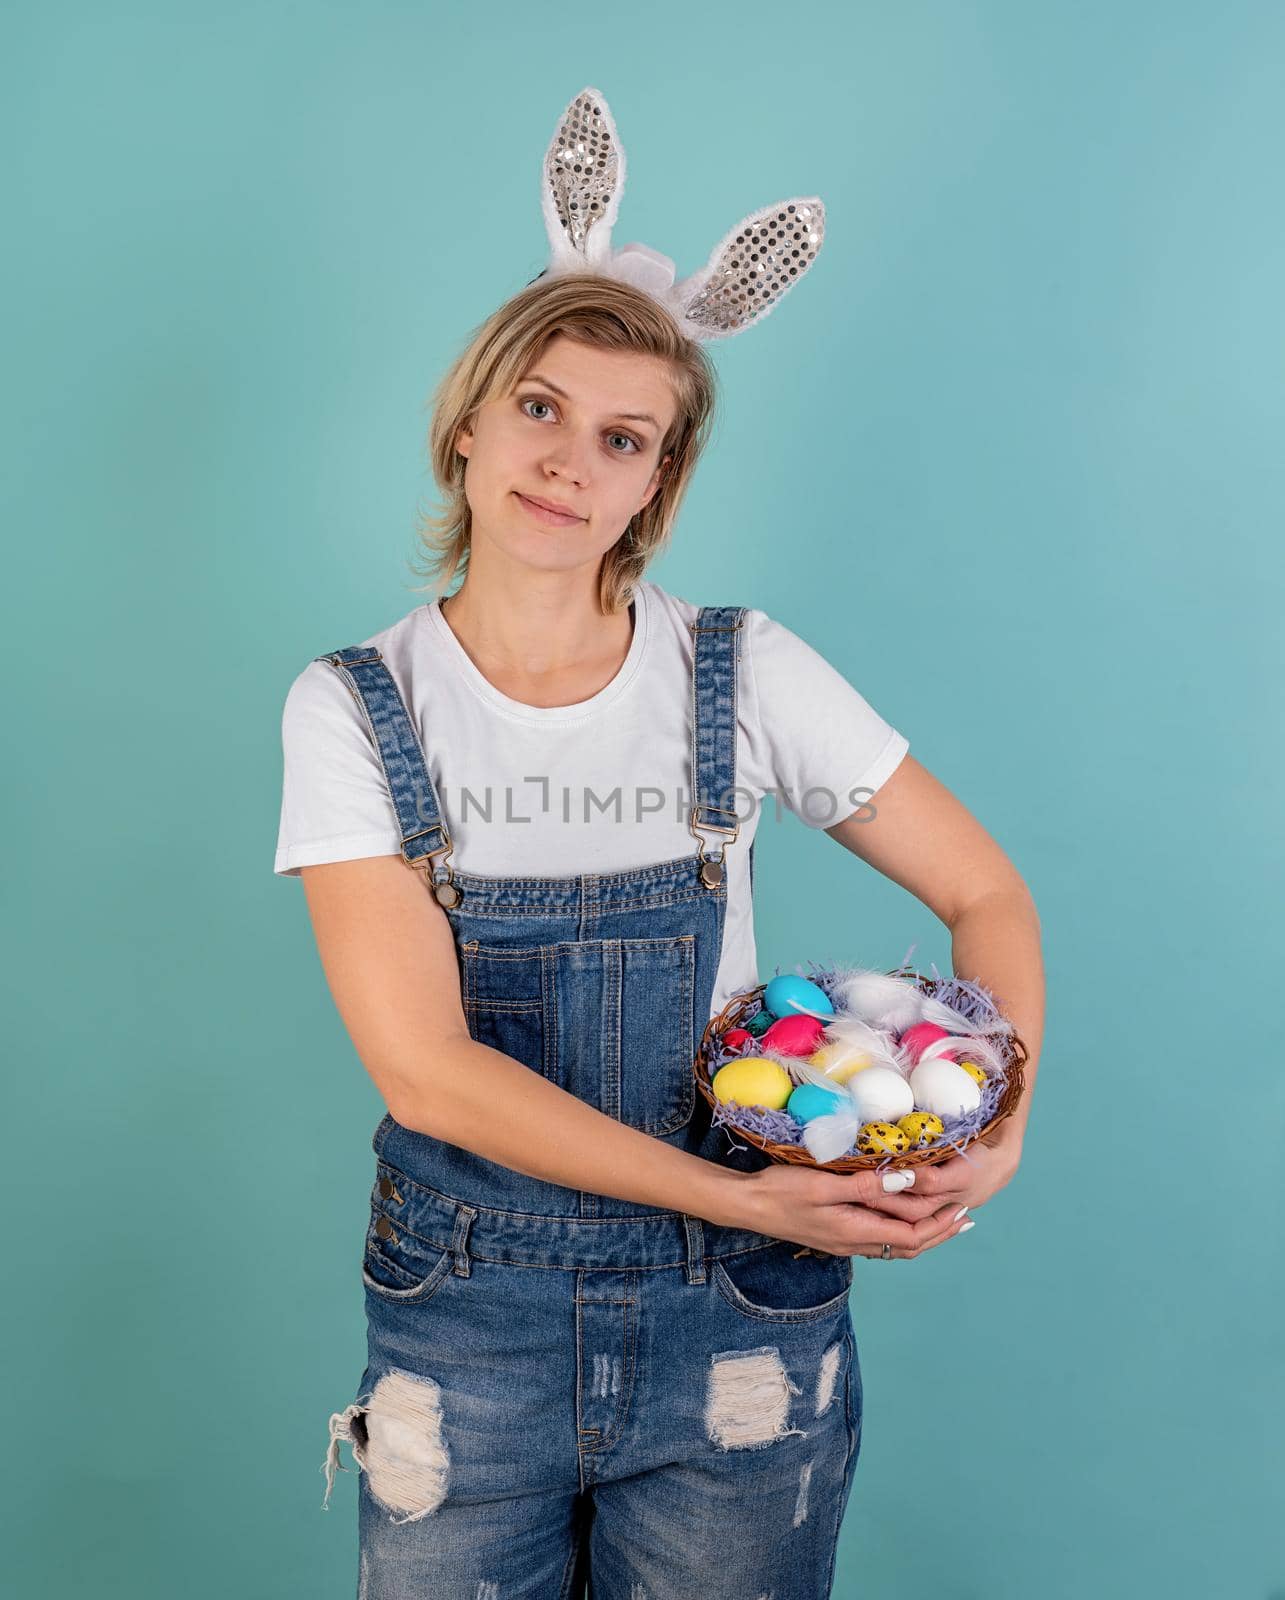 Easter holiday concept. Pretty young woman with bunny ears holding a basket with Easter colored eggs isolated on blue background